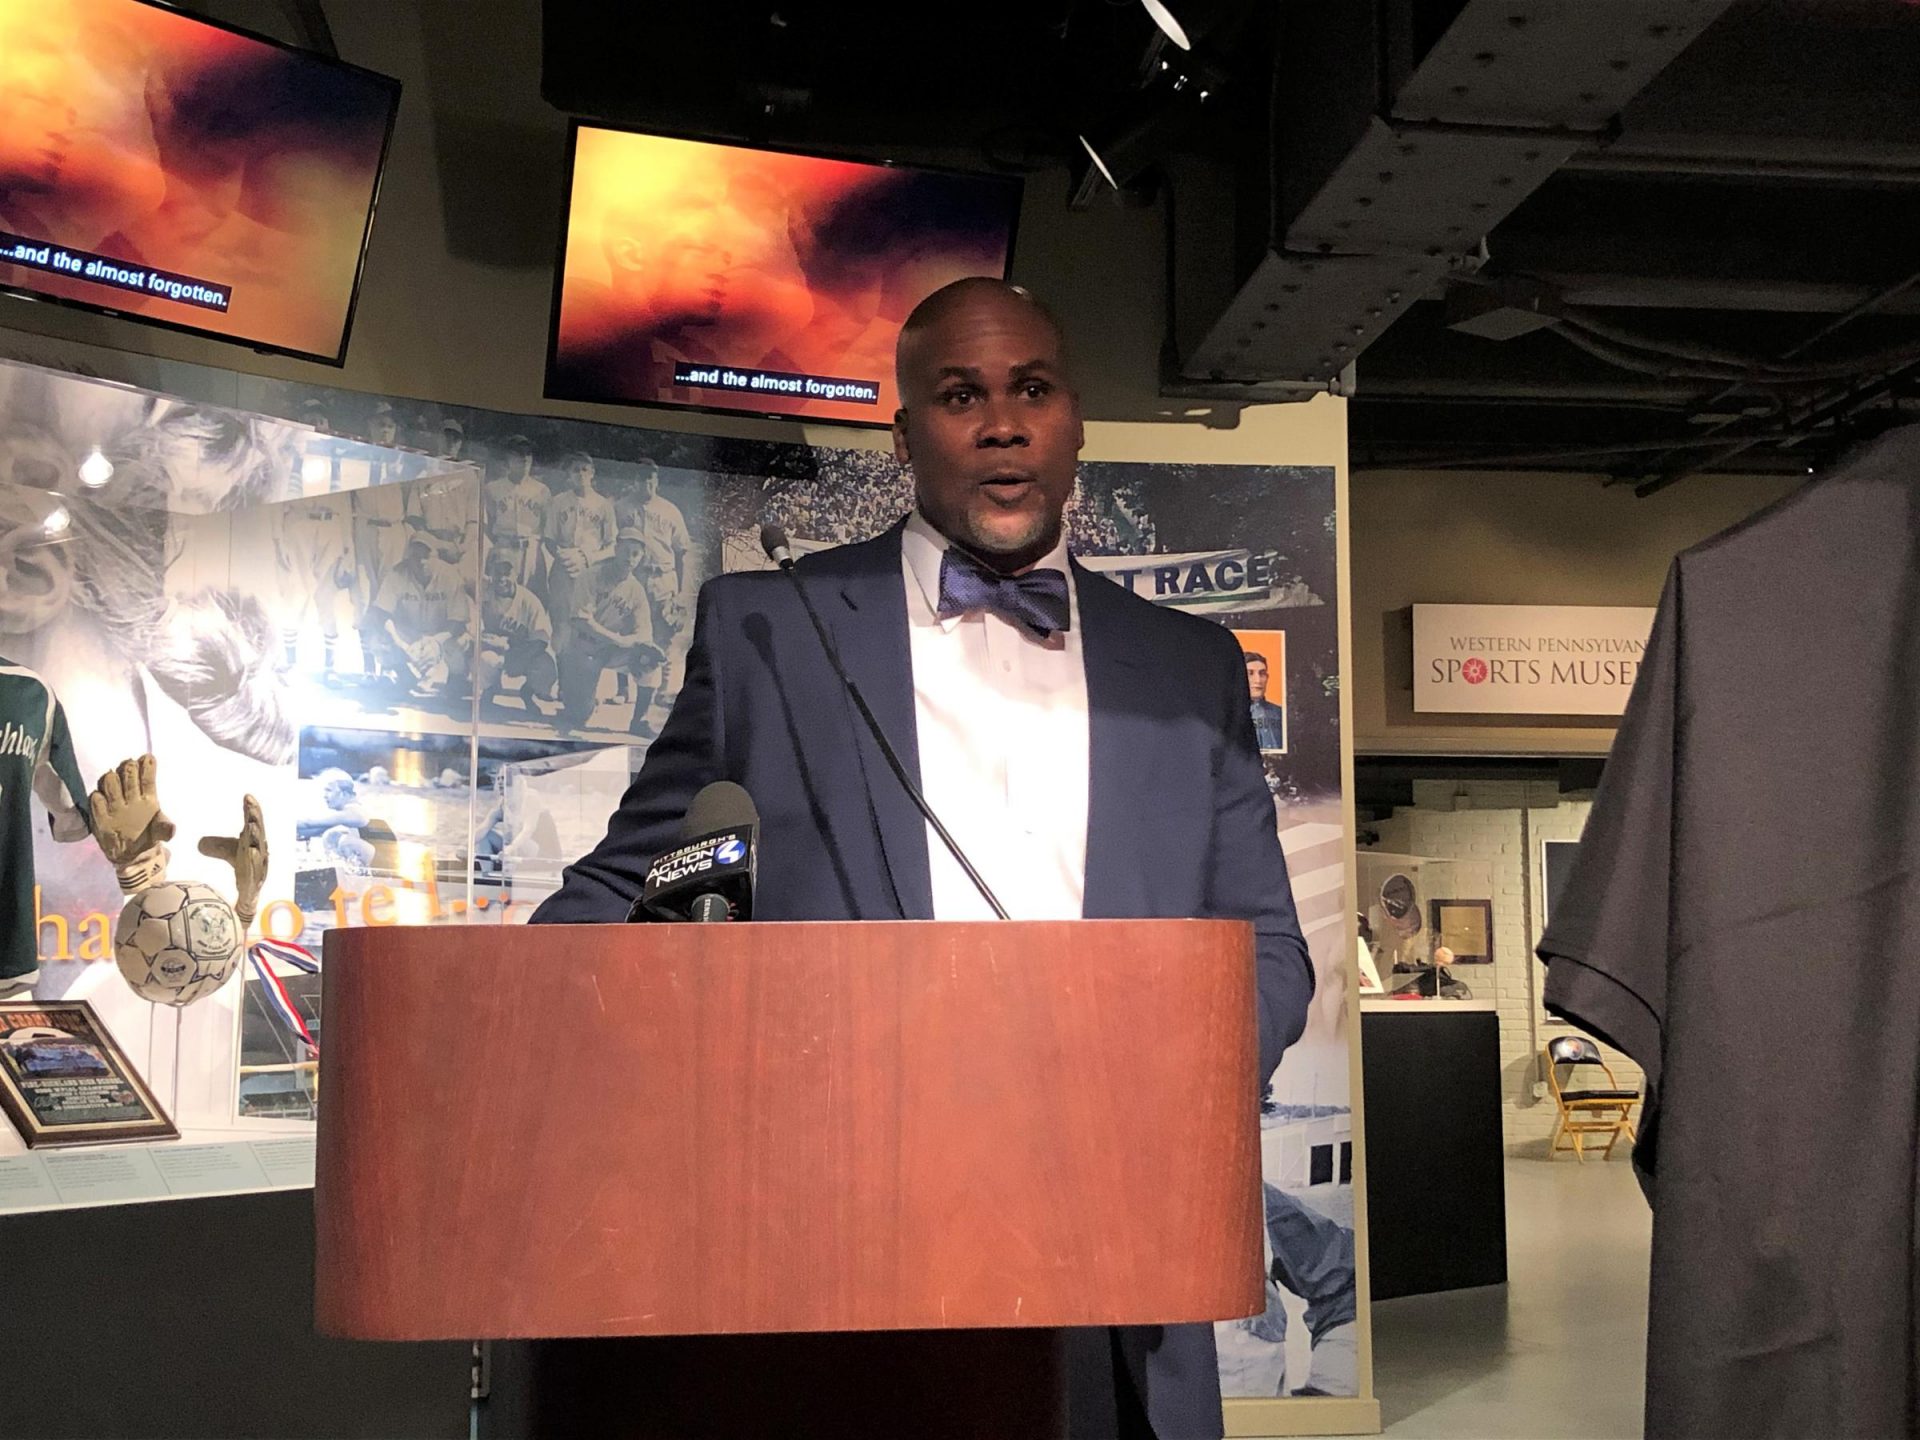 Sean Gibson, executive director of the Josh Gibson Foundation and great-grandson of Gibson, speaks to the press during the celebration events announcements on Tuesday, Nov. 12, 2019.